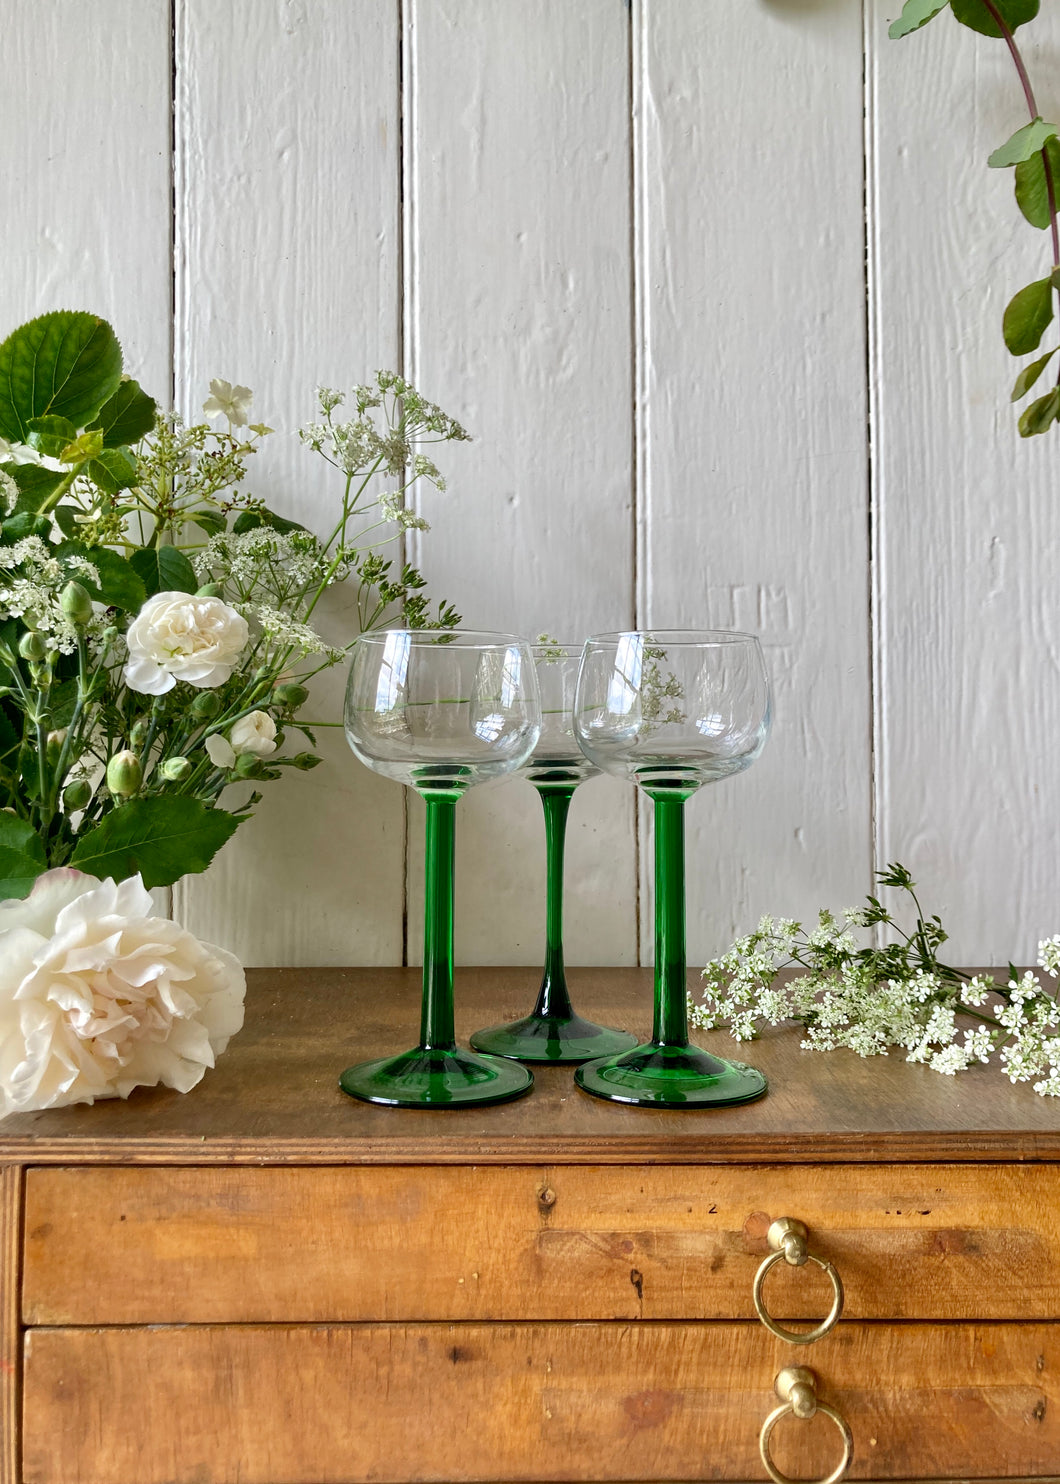 Set of 6 French glasses with green stems